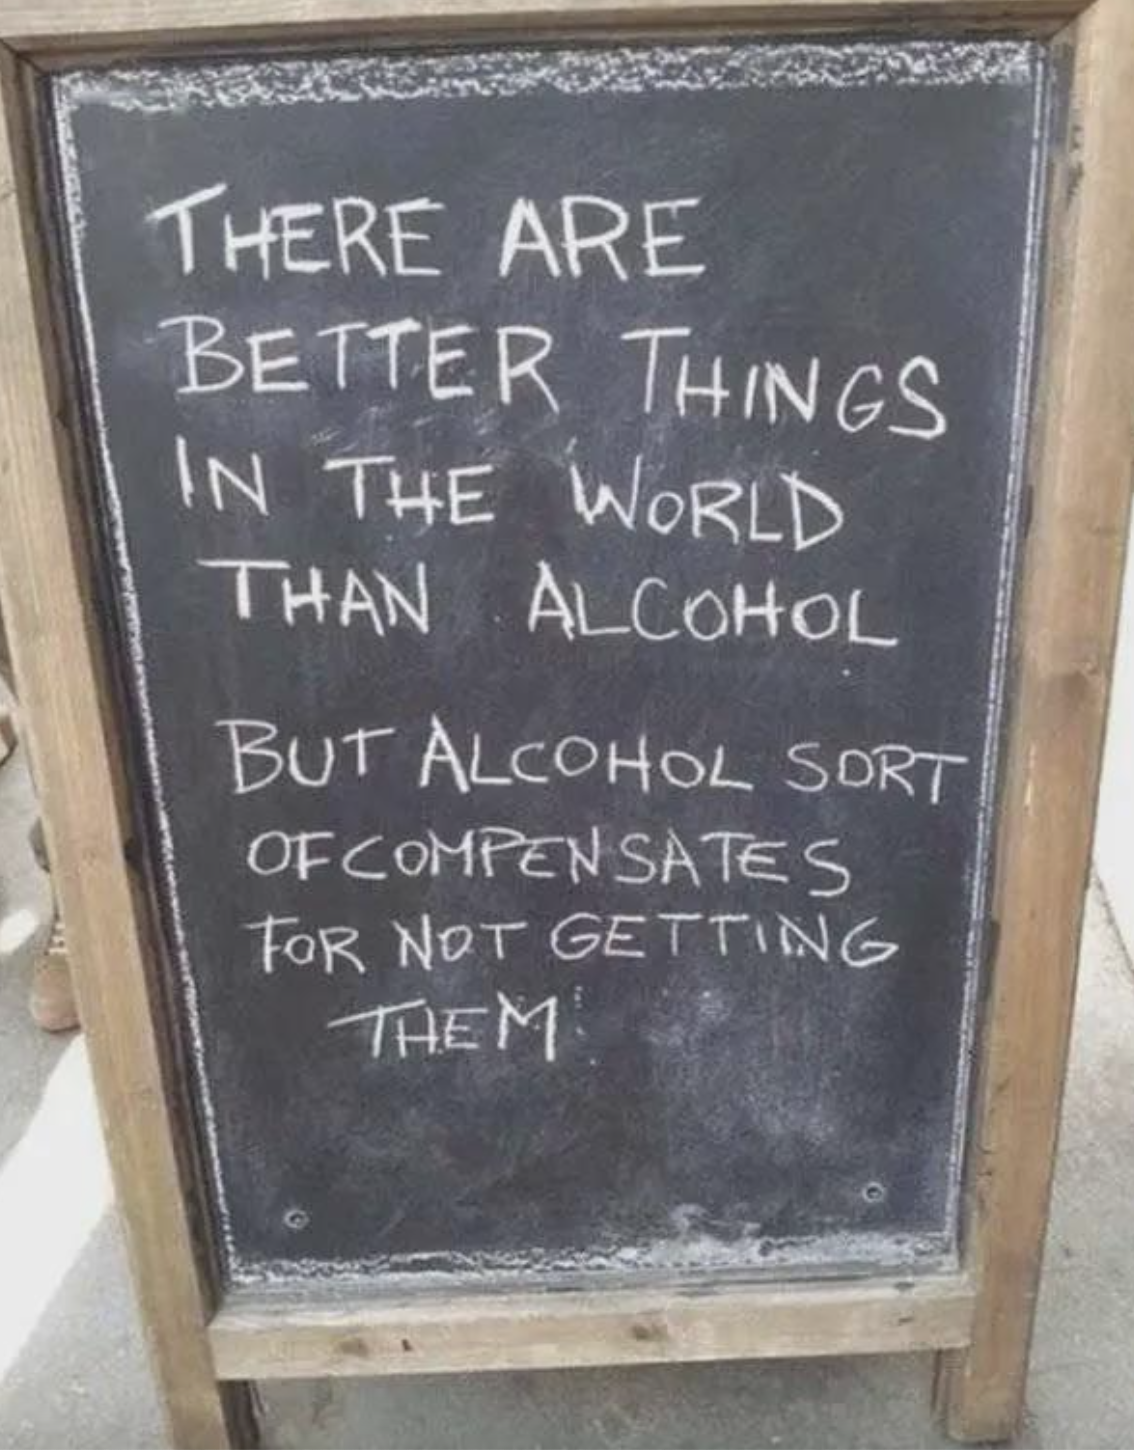 Chalkboard with text: &quot;There are better things in the world than alcohol, but alcohol sort of compensates for not getting them!&quot;